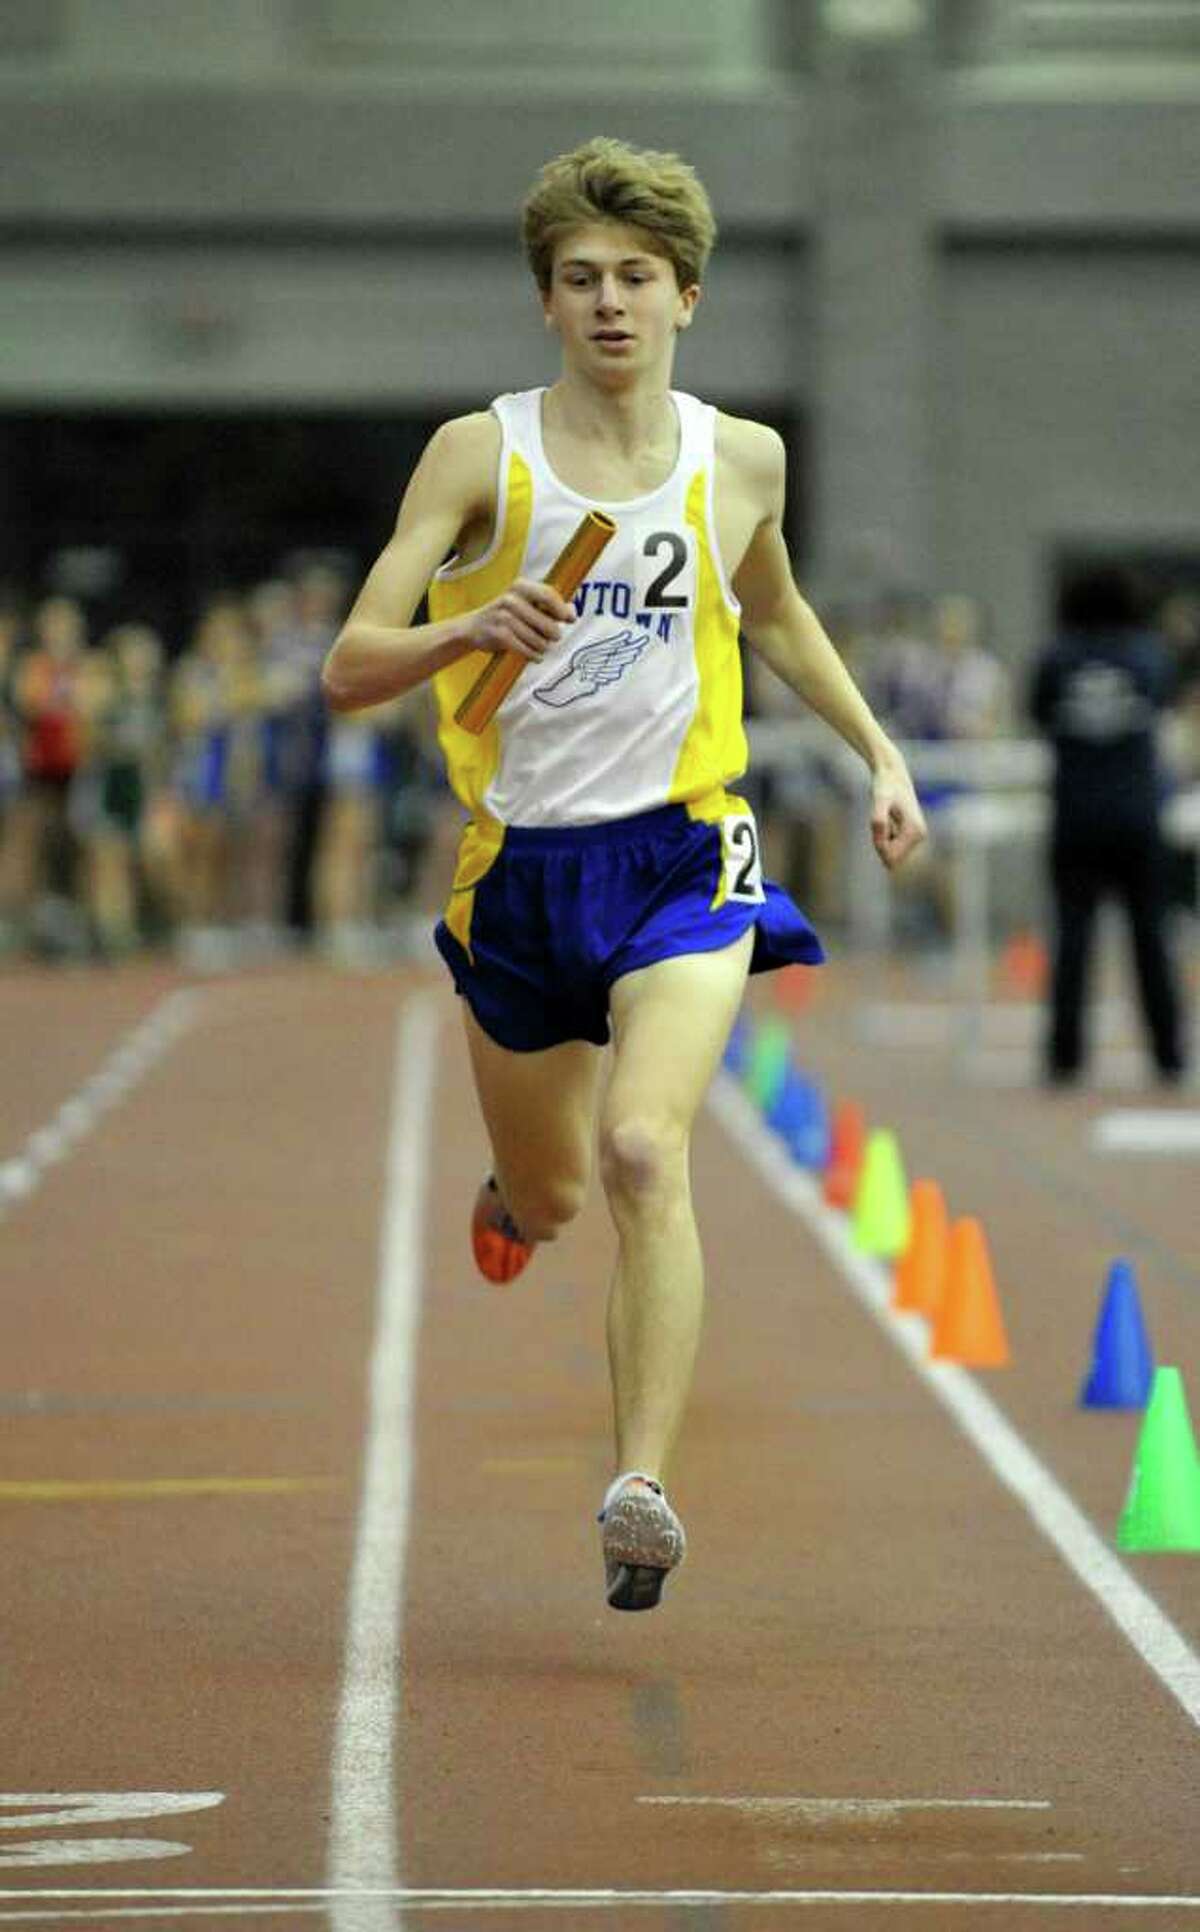 Newtown's Jake Feinstein runs the anchor leg of the 4x800 meter relay during the SWC indoor track and field championships at Hillhouse High School in New Haven on Saturday, Feb. 4, 2012.